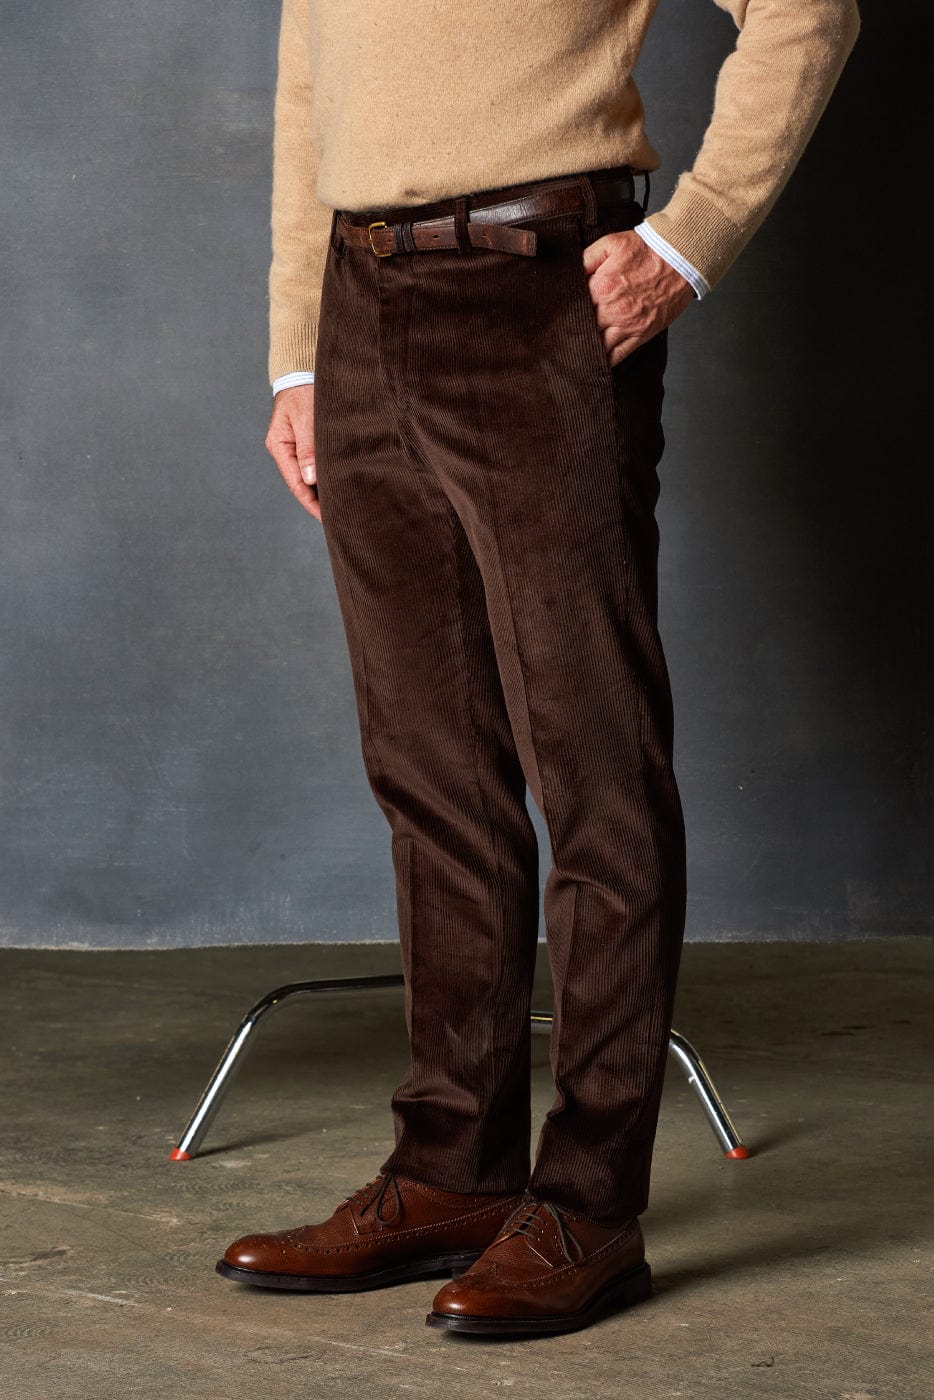 Articles of Style  Signature Corduroy Trouser